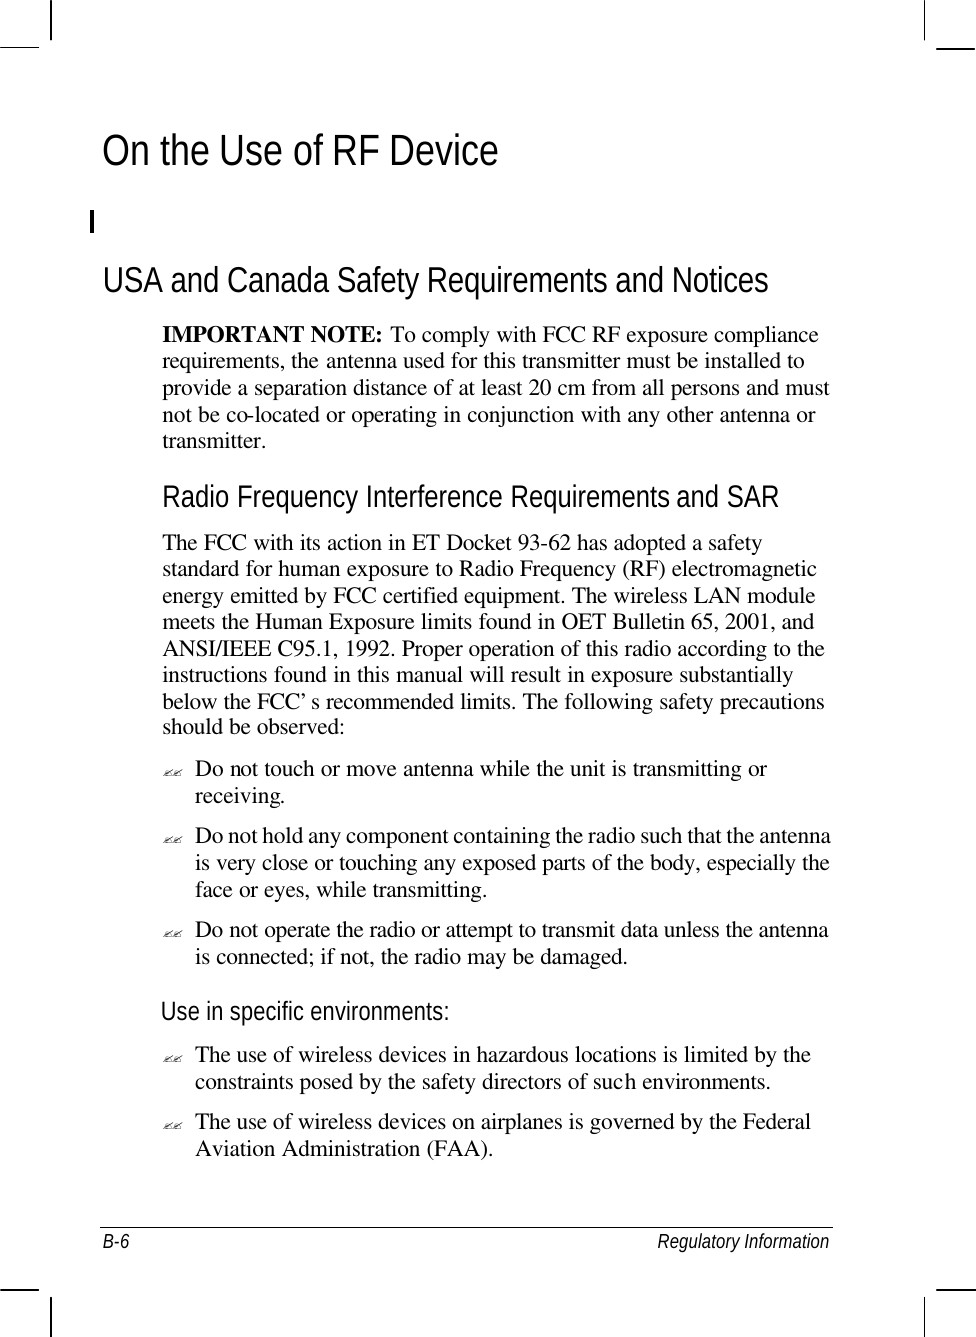  B-6 Regulatory Information On the Use of RF Device  USA and Canada Safety Requirements and Notices IMPORTANT NOTE: To comply with FCC RF exposure compliance requirements, the antenna used for this transmitter must be installed to provide a separation distance of at least 20 cm from all persons and must not be co-located or operating in conjunction with any other antenna or transmitter. Radio Frequency Interference Requirements and SAR The FCC with its action in ET Docket 93-62 has adopted a safety standard for human exposure to Radio Frequency (RF) electromagnetic energy emitted by FCC certified equipment. The wireless LAN module meets the Human Exposure limits found in OET Bulletin 65, 2001, and ANSI/IEEE C95.1, 1992. Proper operation of this radio according to the instructions found in this manual will result in exposure substantially below the FCC’s recommended limits. The following safety precautions should be observed: ?? Do not touch or move antenna while the unit is transmitting or receiving. ?? Do not hold any component containing the radio such that the antenna is very close or touching any exposed parts of the body, especially the face or eyes, while transmitting. ?? Do not operate the radio or attempt to transmit data unless the antenna is connected; if not, the radio may be damaged. Use in specific environments: ?? The use of wireless devices in hazardous locations is limited by the constraints posed by the safety directors of such environments. ?? The use of wireless devices on airplanes is governed by the Federal Aviation Administration (FAA). 